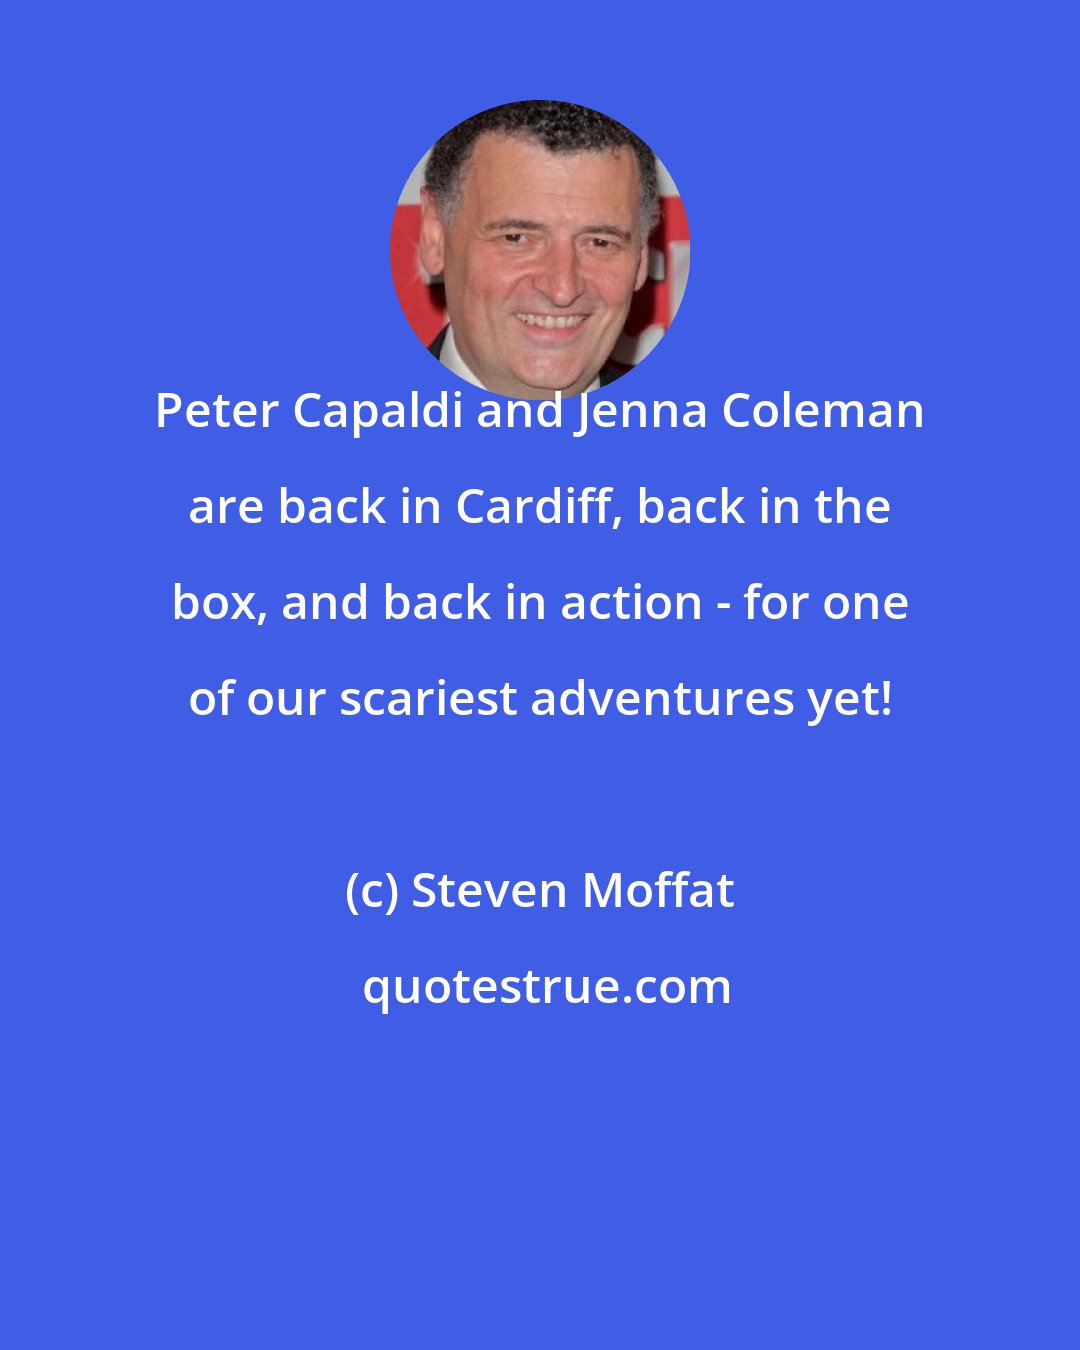 Steven Moffat: Peter Capaldi and Jenna Coleman are back in Cardiff, back in the box, and back in action - for one of our scariest adventures yet!